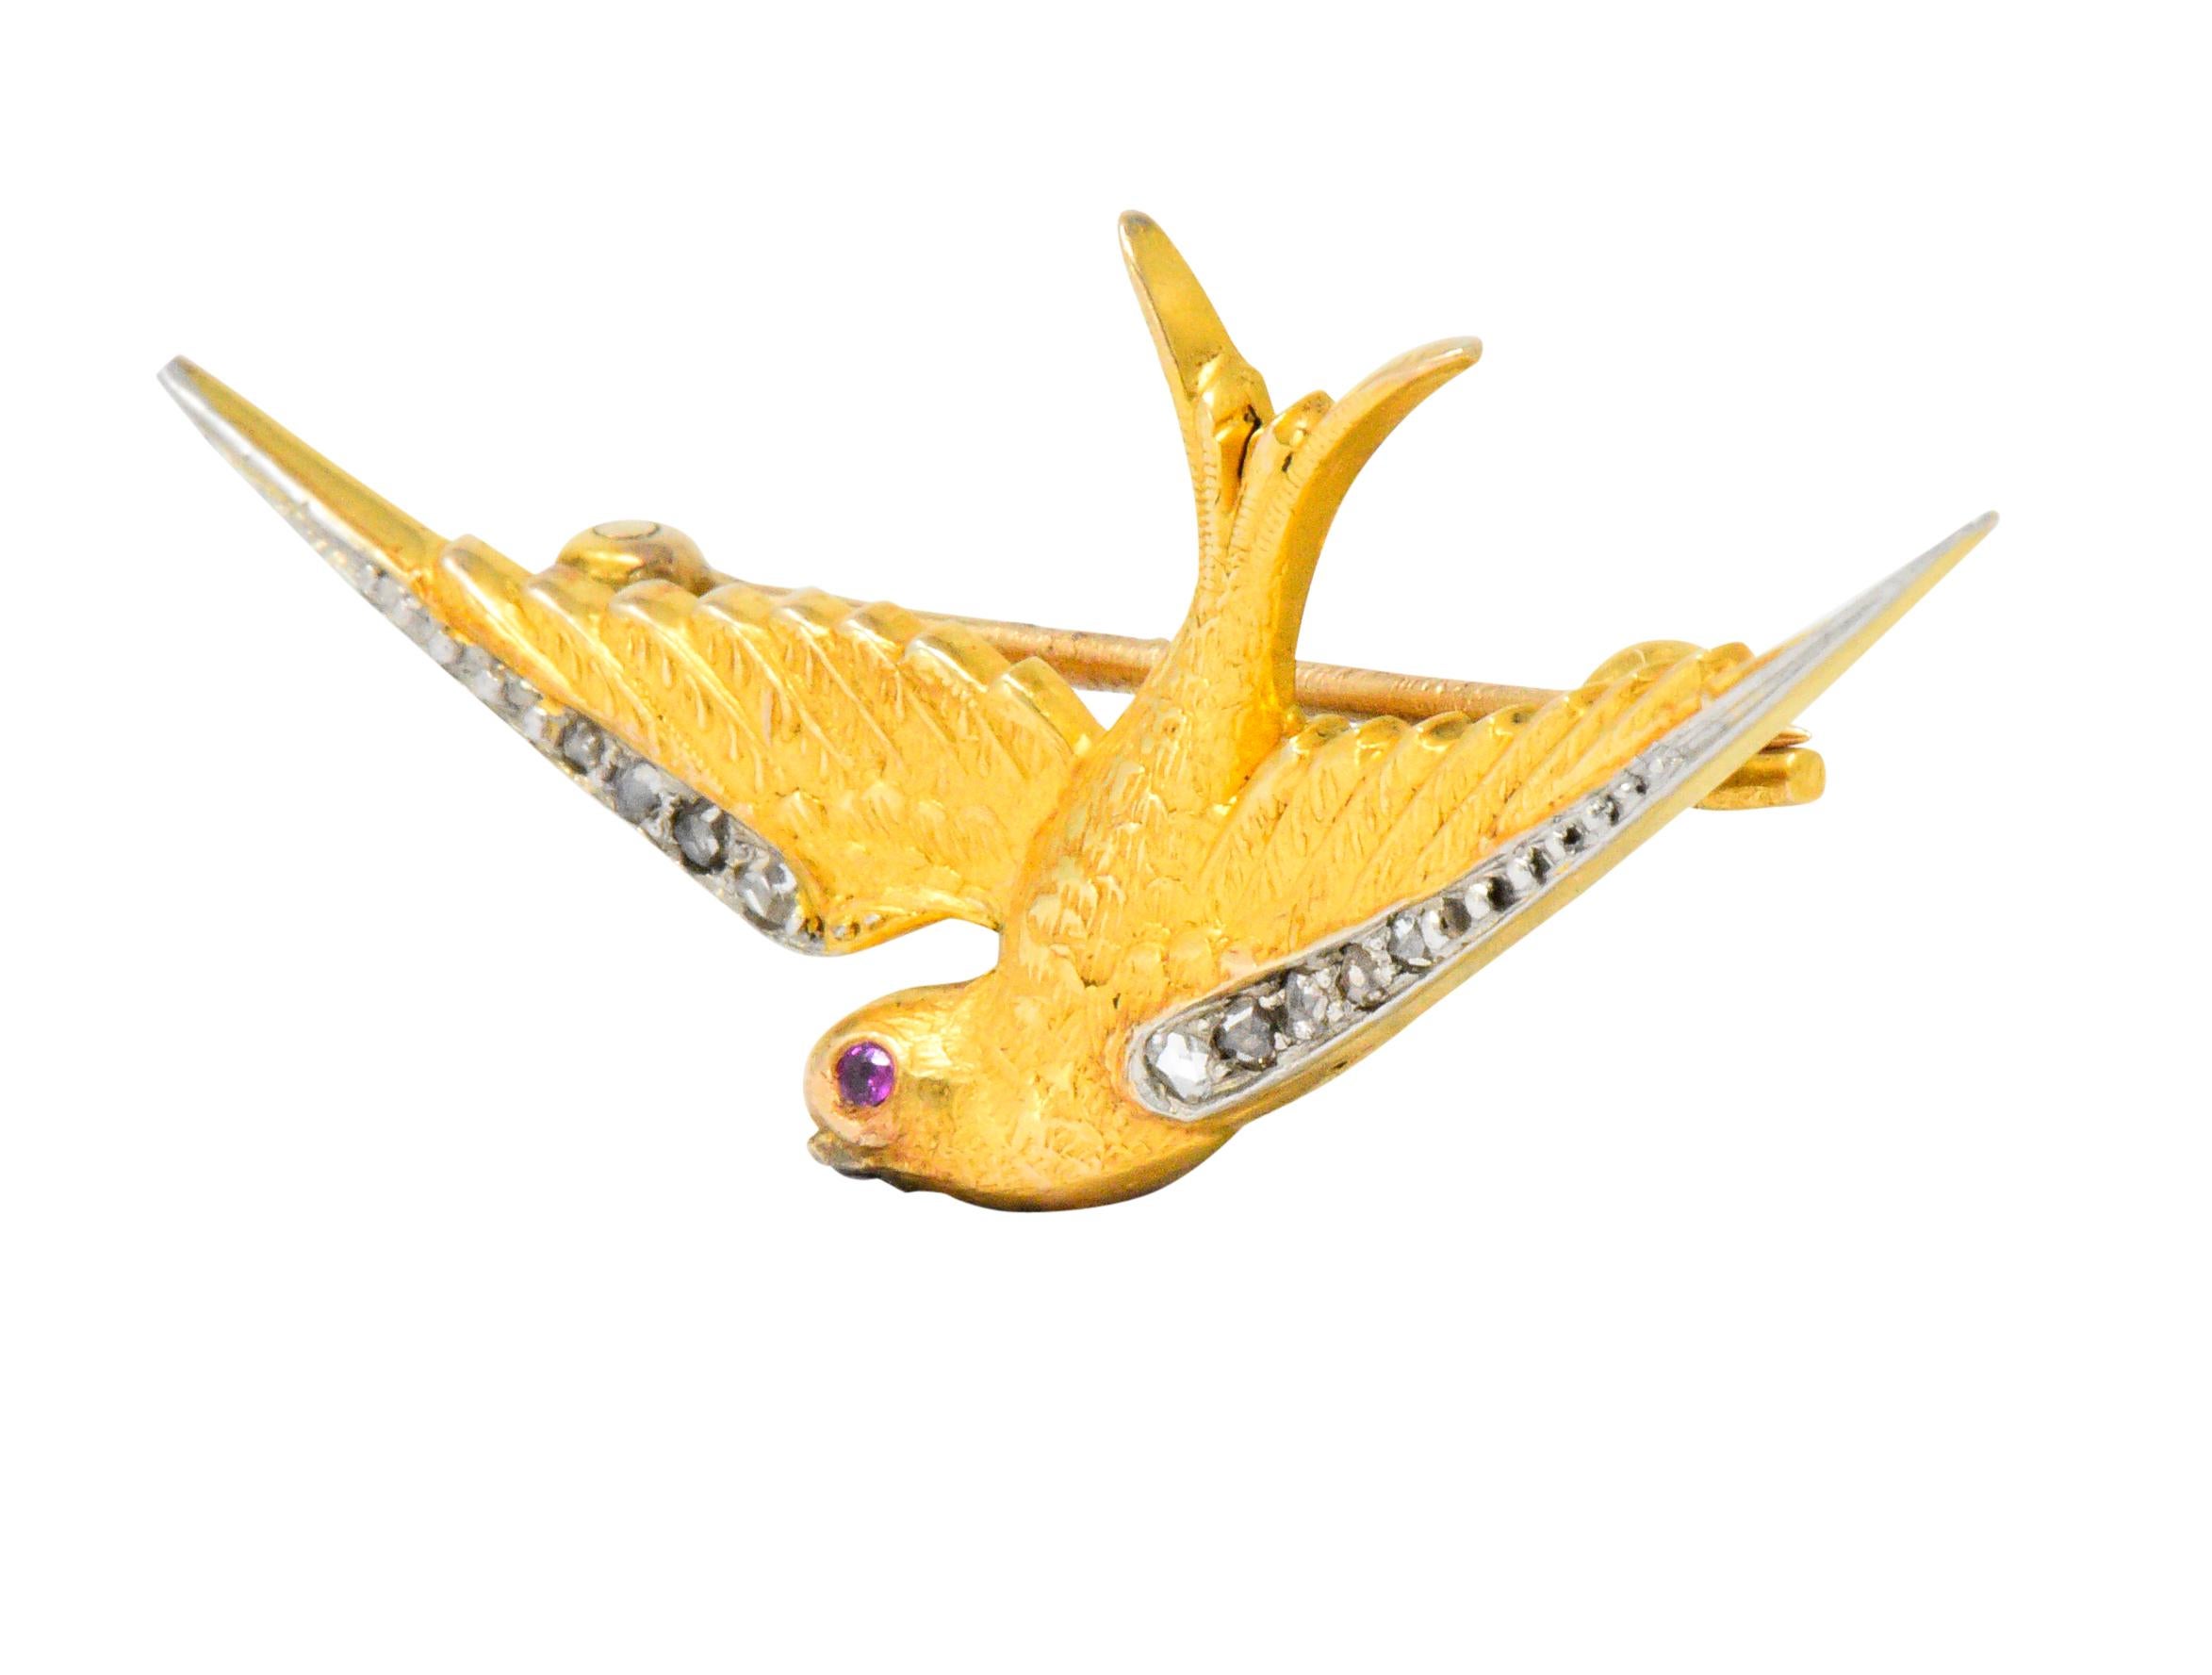 Designed as a swallow, mid-flight

Wings accented with tiny rose cut diamonds 

Highly detailed textured gold with a tiny round cut ruby eye

With maker's mark

Measures: 1 1/2 x 3/4 (widest) Inch

Total Weight: 2.4 Grams

Sweet. Loving. Gentle.   